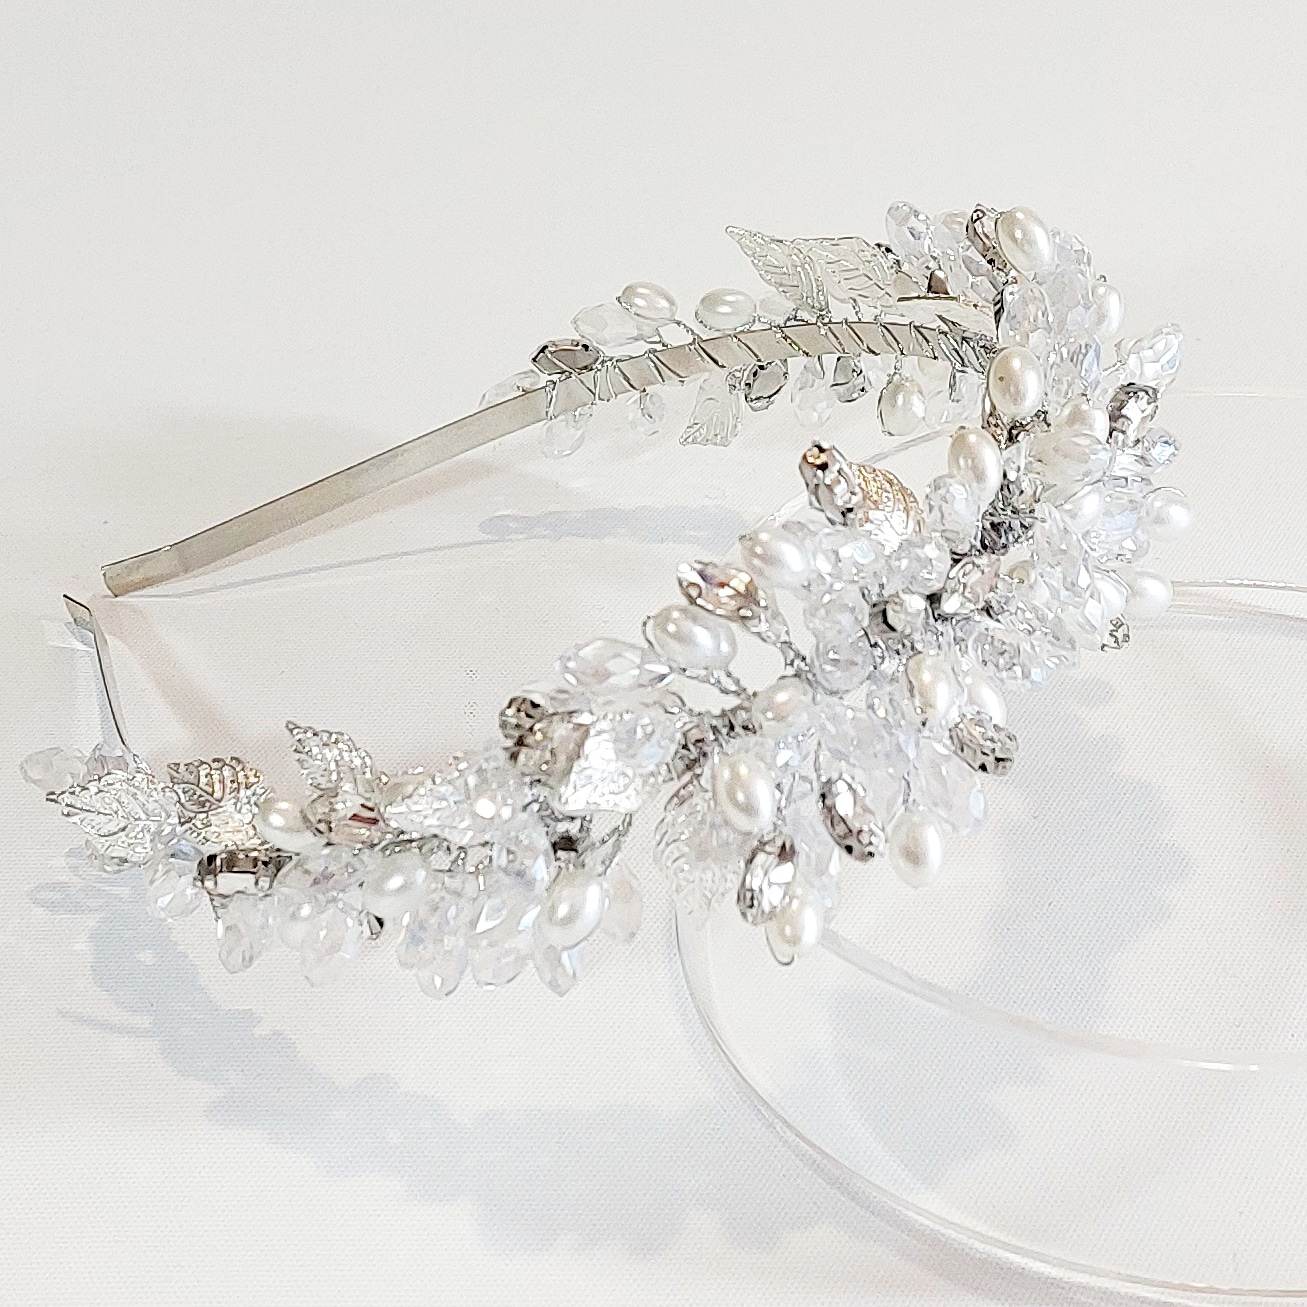 a sparkling vintage styled headpiece for the races or wedding